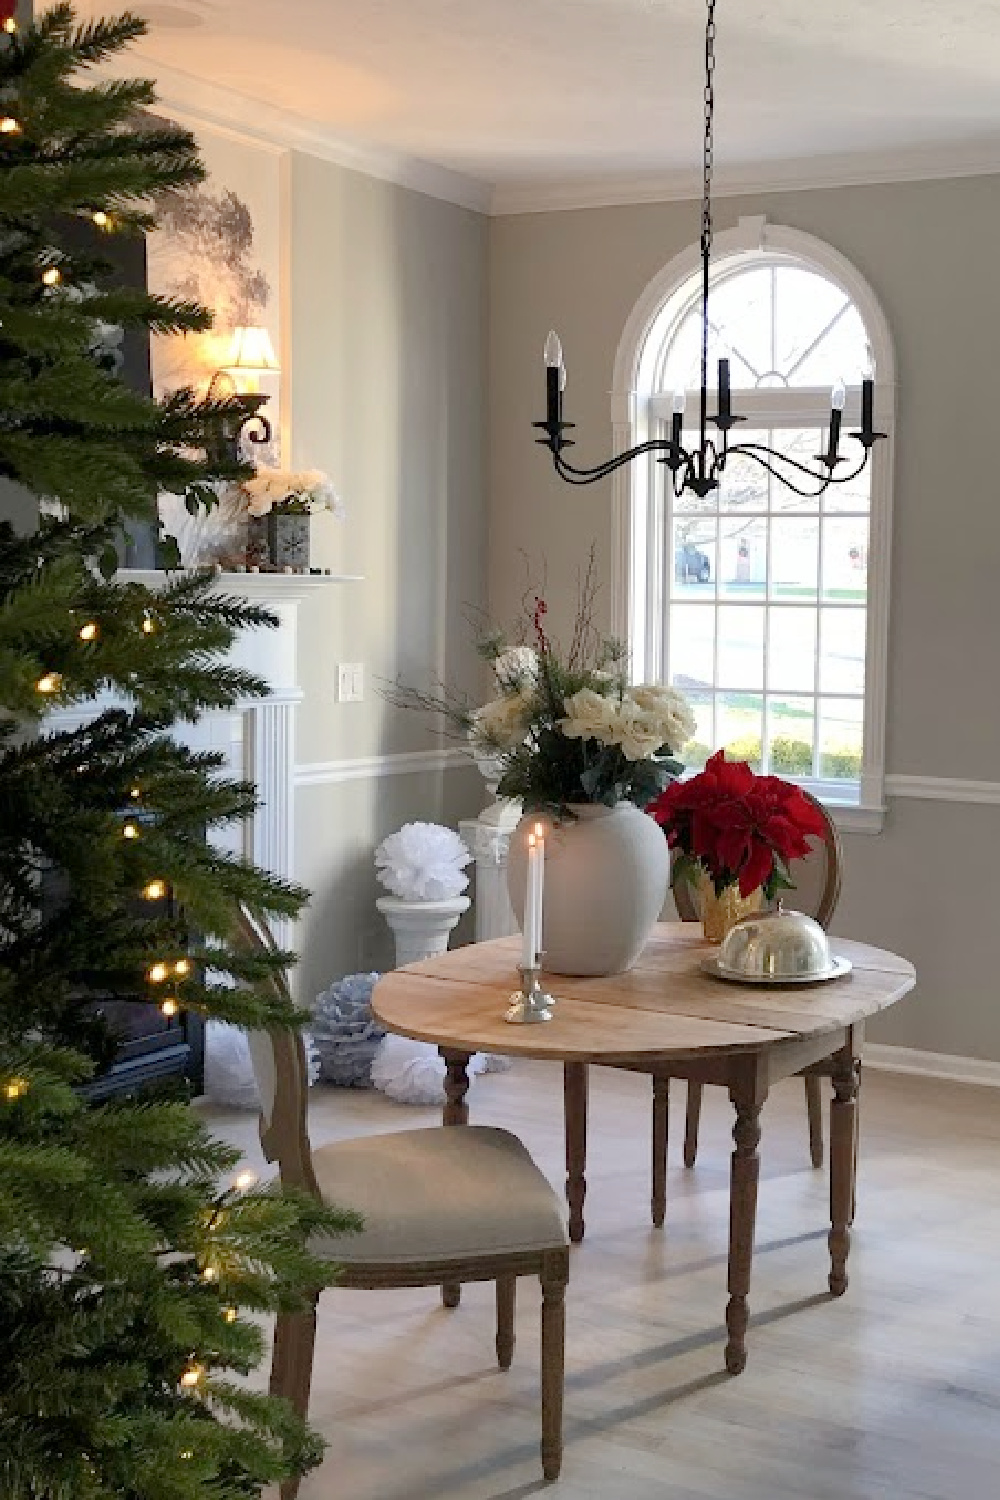 Dining room in our Georgian with holiday decor and Christmas tree nearby - Hello Lovely Studio.